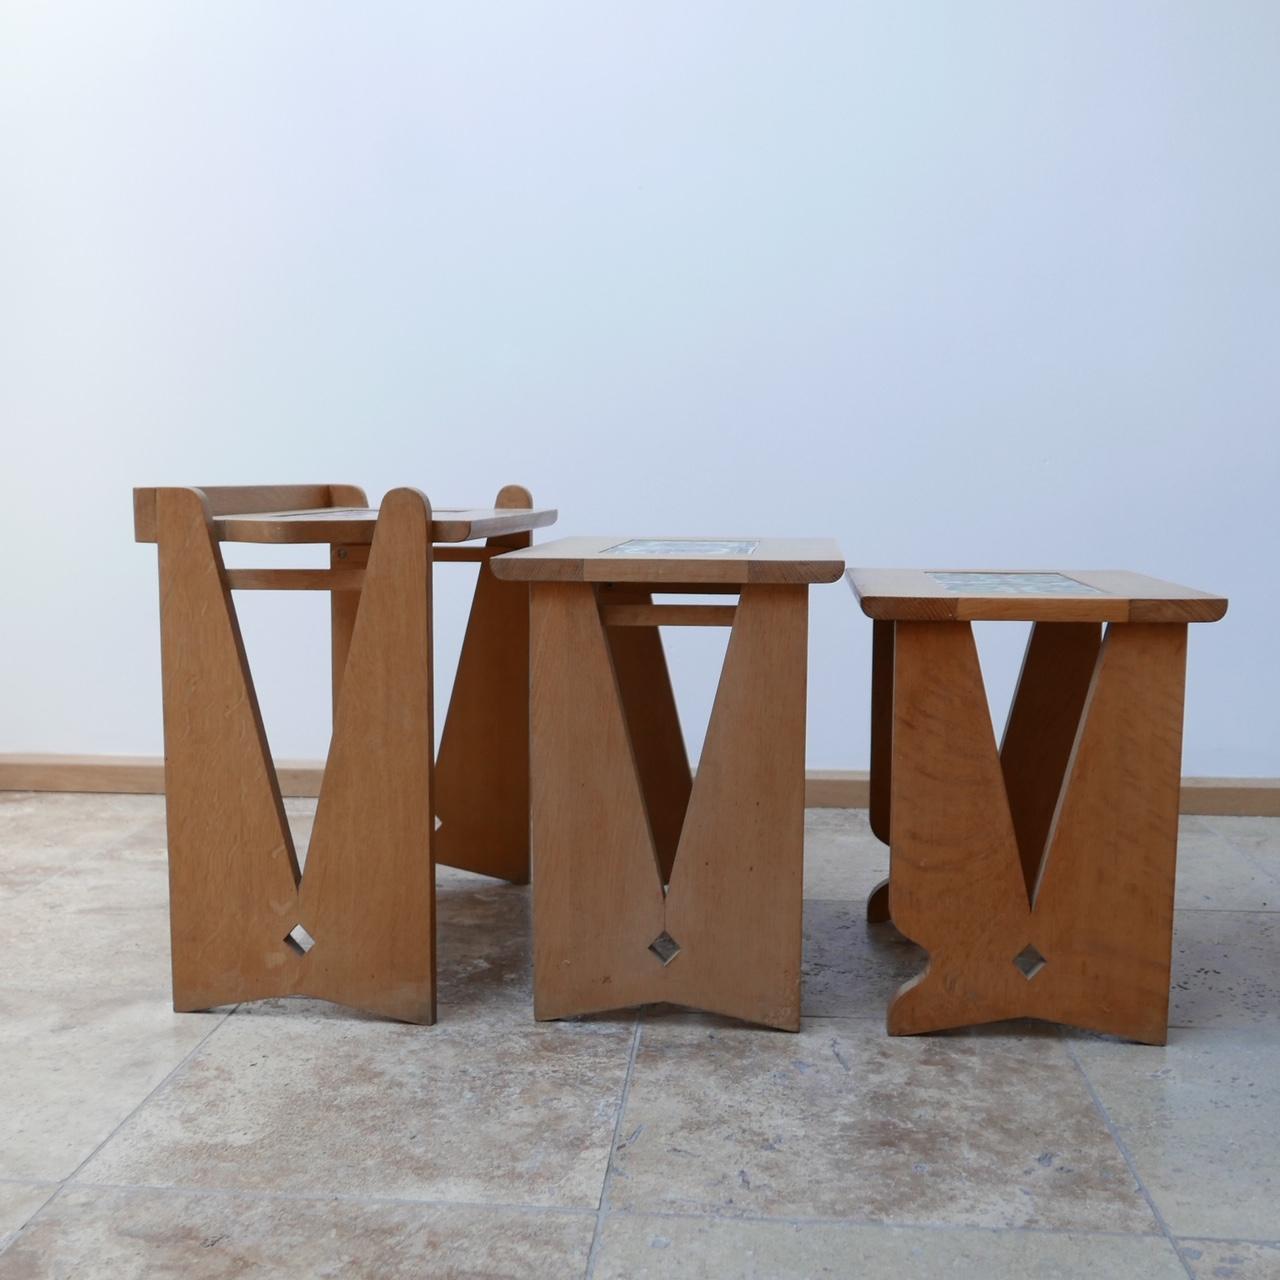 A trio of nesting tables by French design legends Guillerme et Chambron.

French, circa 1960s.

Retaining their original ceramics, which can easily be replaced with mirror or smoked glass to taste.

The tables are formed from oak, and the